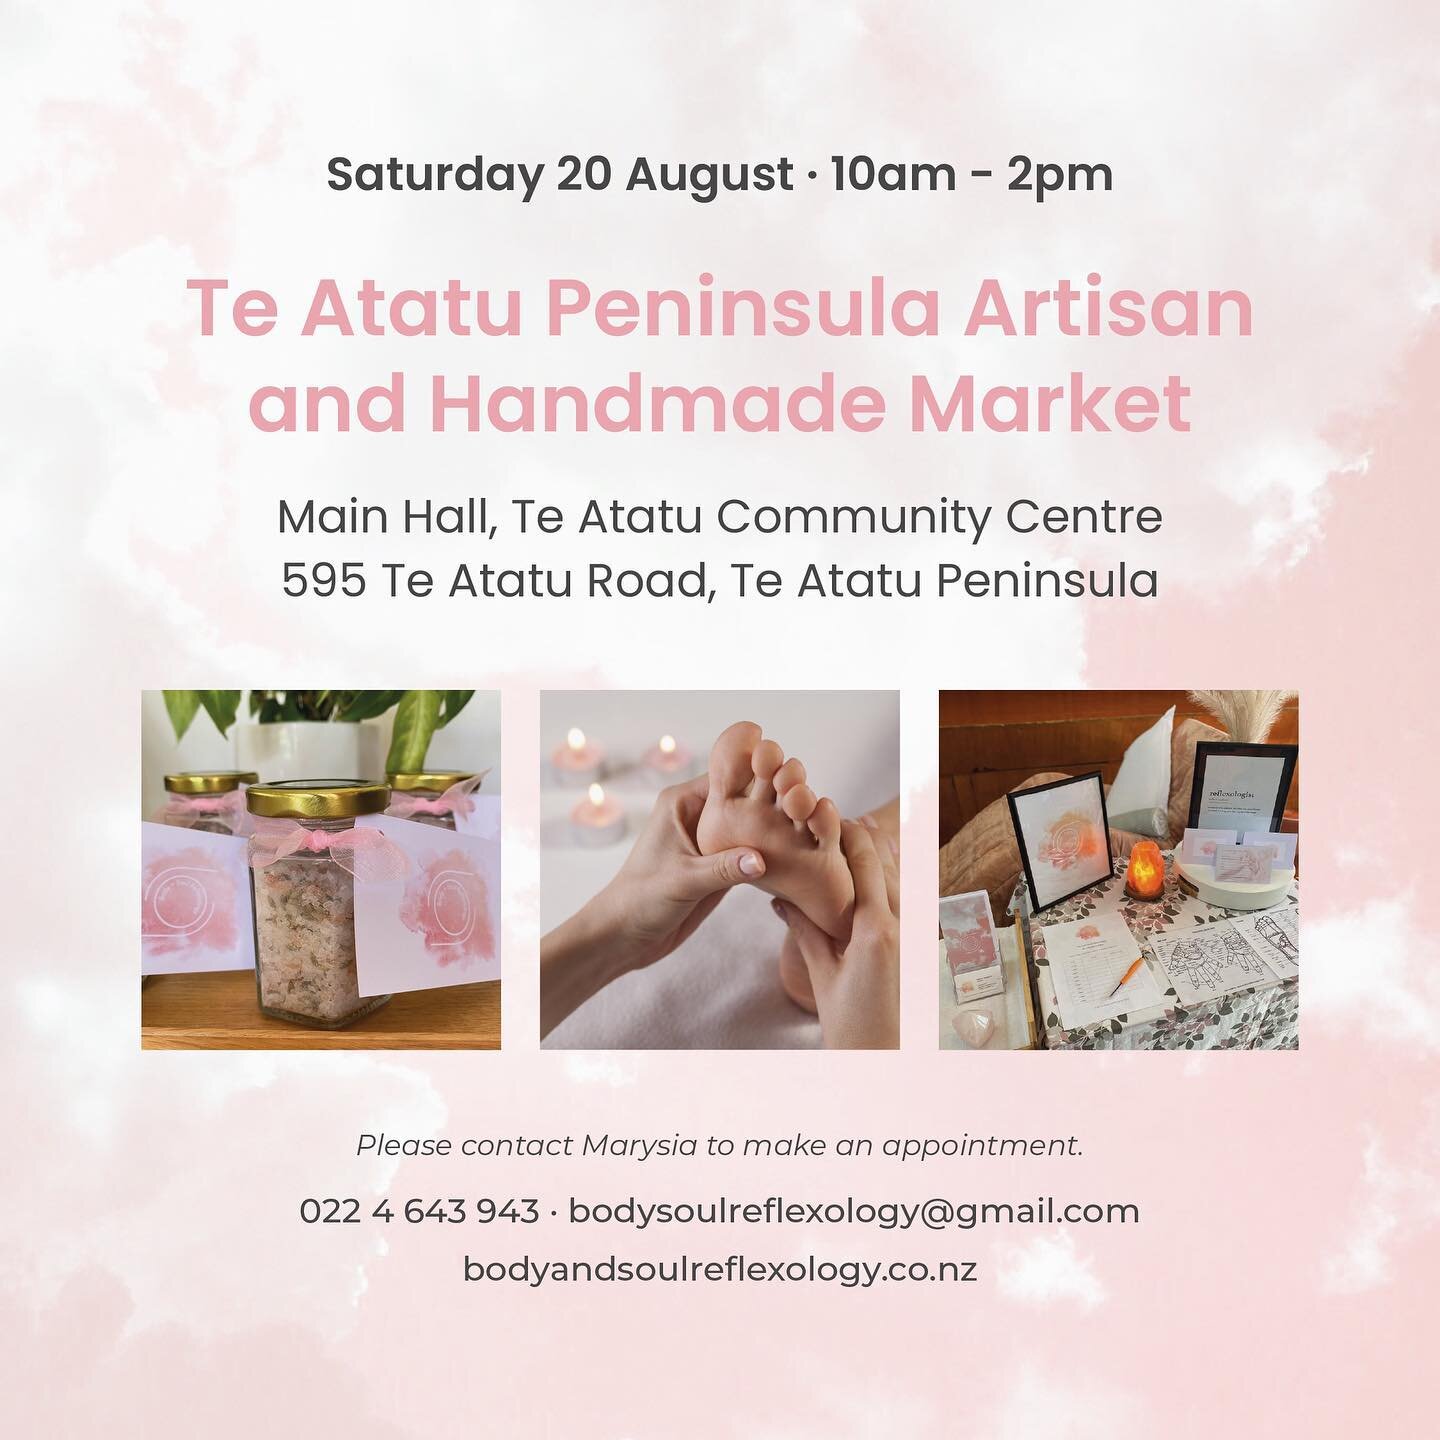 Tomorrow, I&rsquo;ll be at the Good Buy Winter Market at the Te Atatu Community Centre ✨

Treat yourself to some relaxation with Reflexology or an Indian head massage and release those winter blues. 

Relaxing Bath Salts will be available for purchas